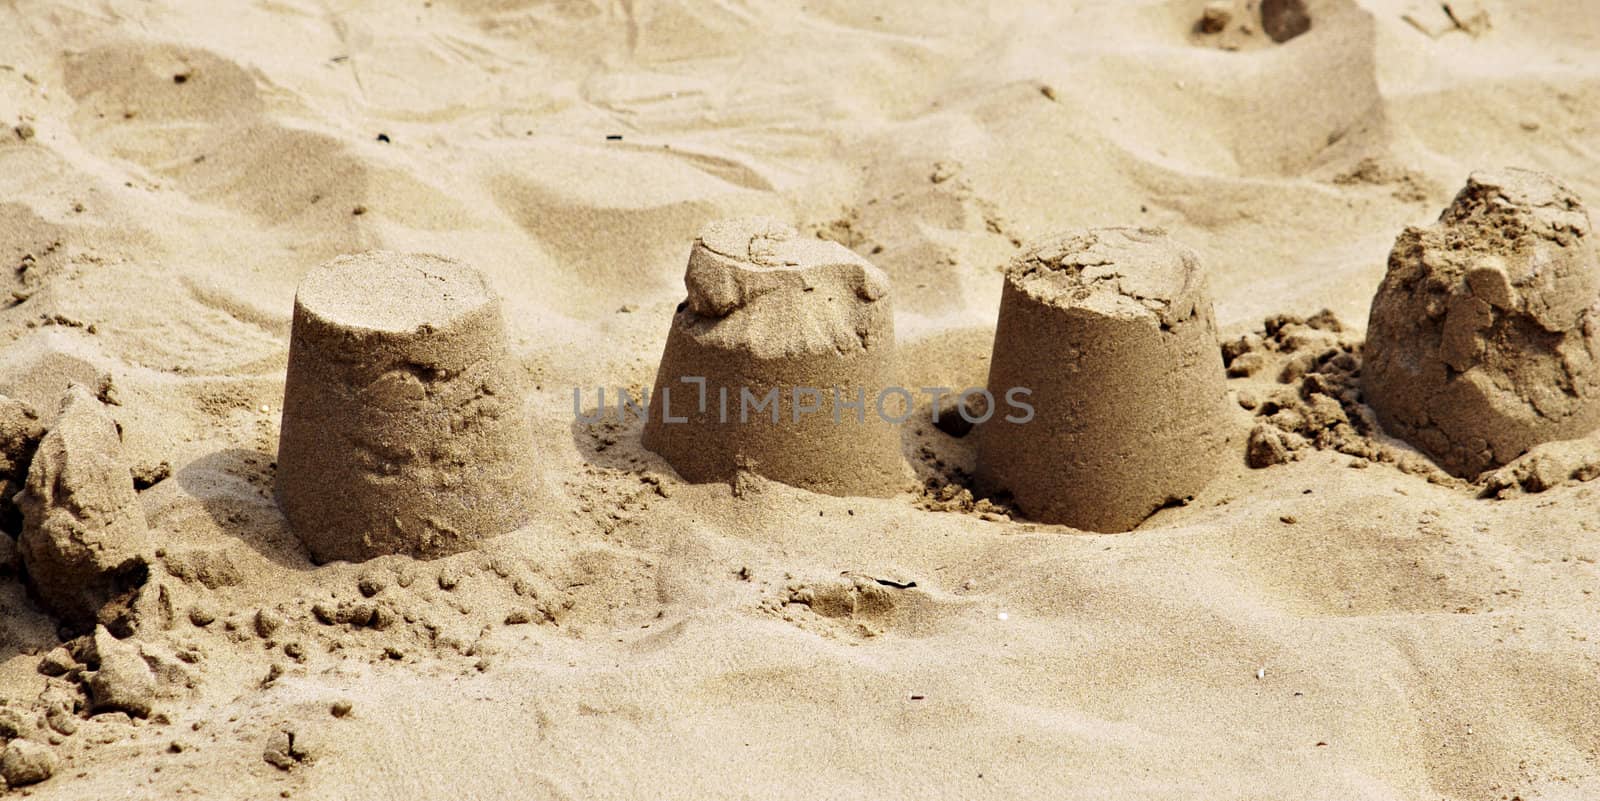 Crumbling deserted sand castles on a beach